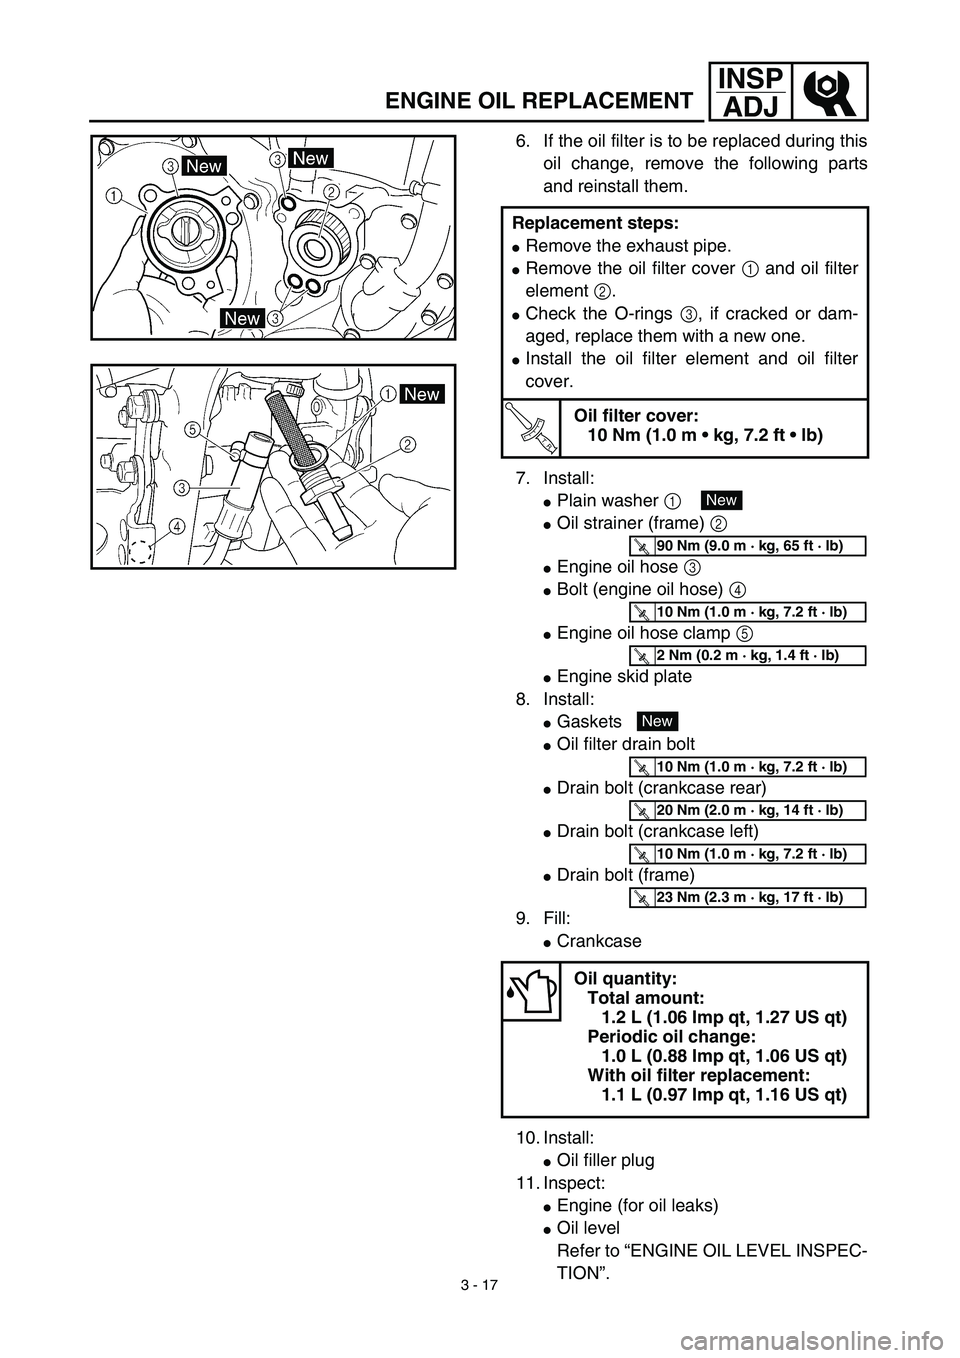 YAMAHA WR 450F 2003  Owners Manual 3 - 17
INSP
ADJ
ENGINE OIL REPLACEMENT
6. If the oil filter is to be replaced during this
oil change, remove the following parts
and reinstall them.
7. Install:
Plain washer 1 
Oil strainer (frame) 